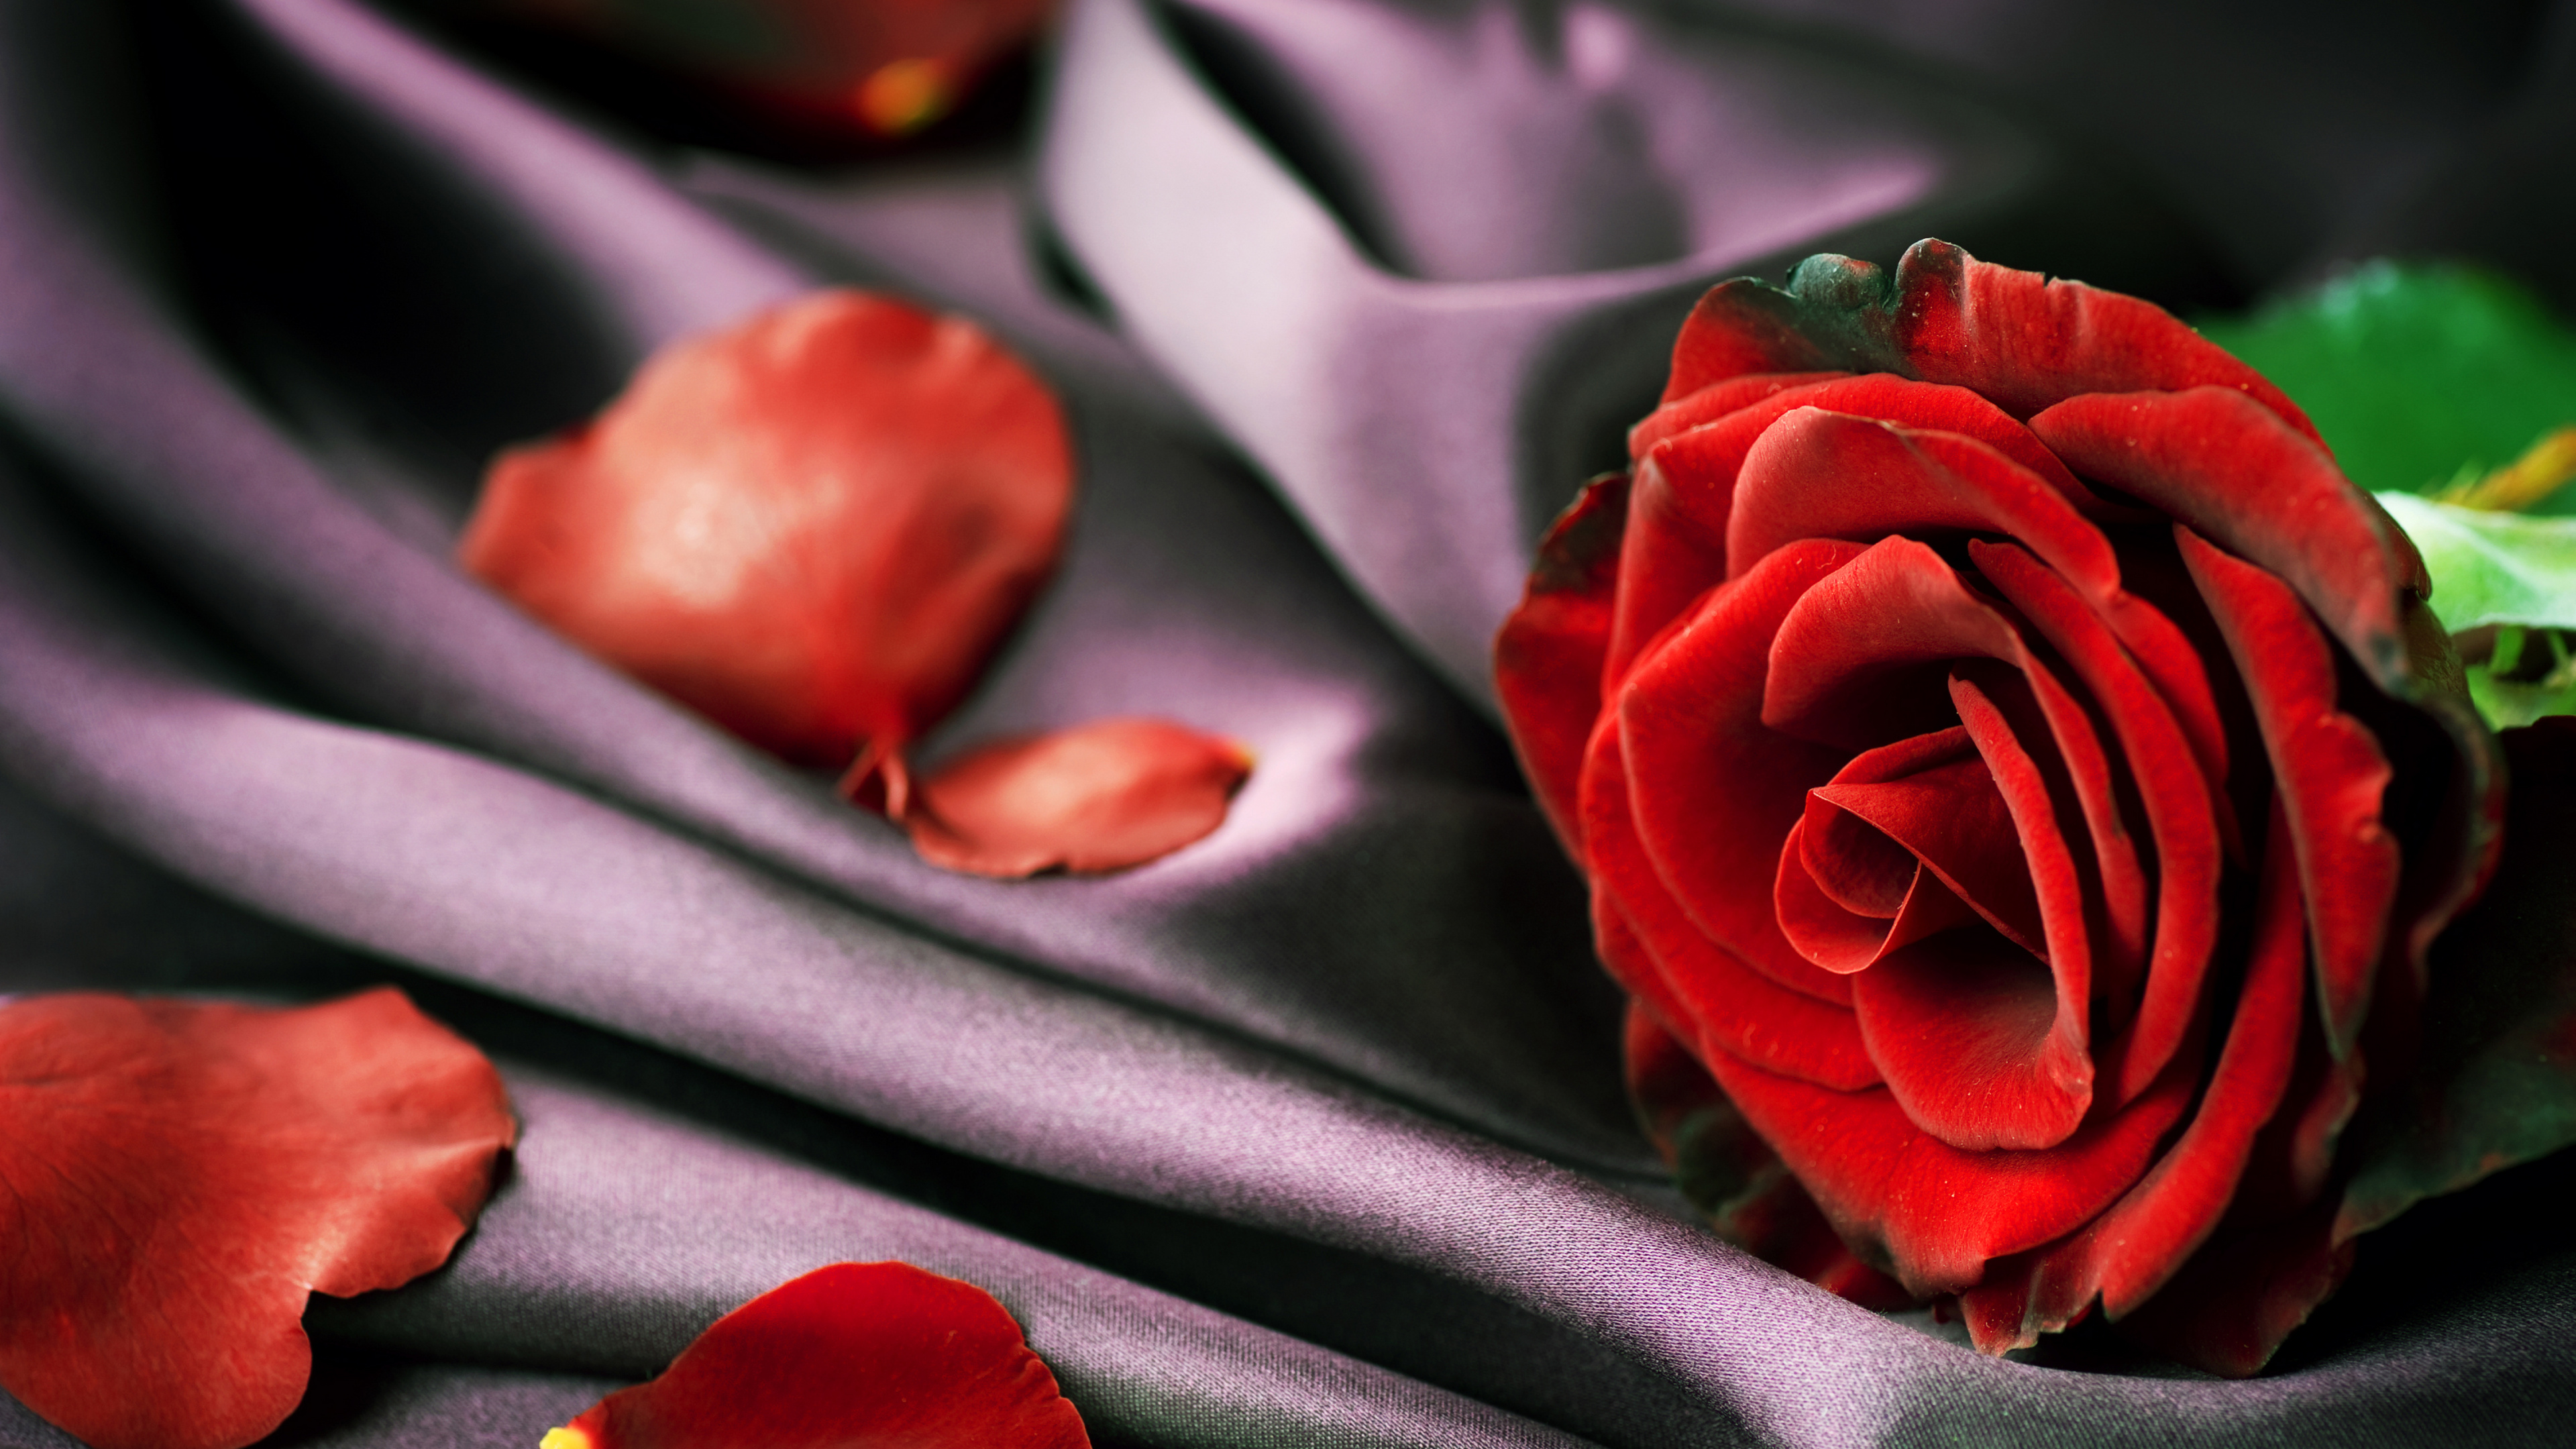 Red Rose on Gray Textile. Wallpaper in 3840x2160 Resolution